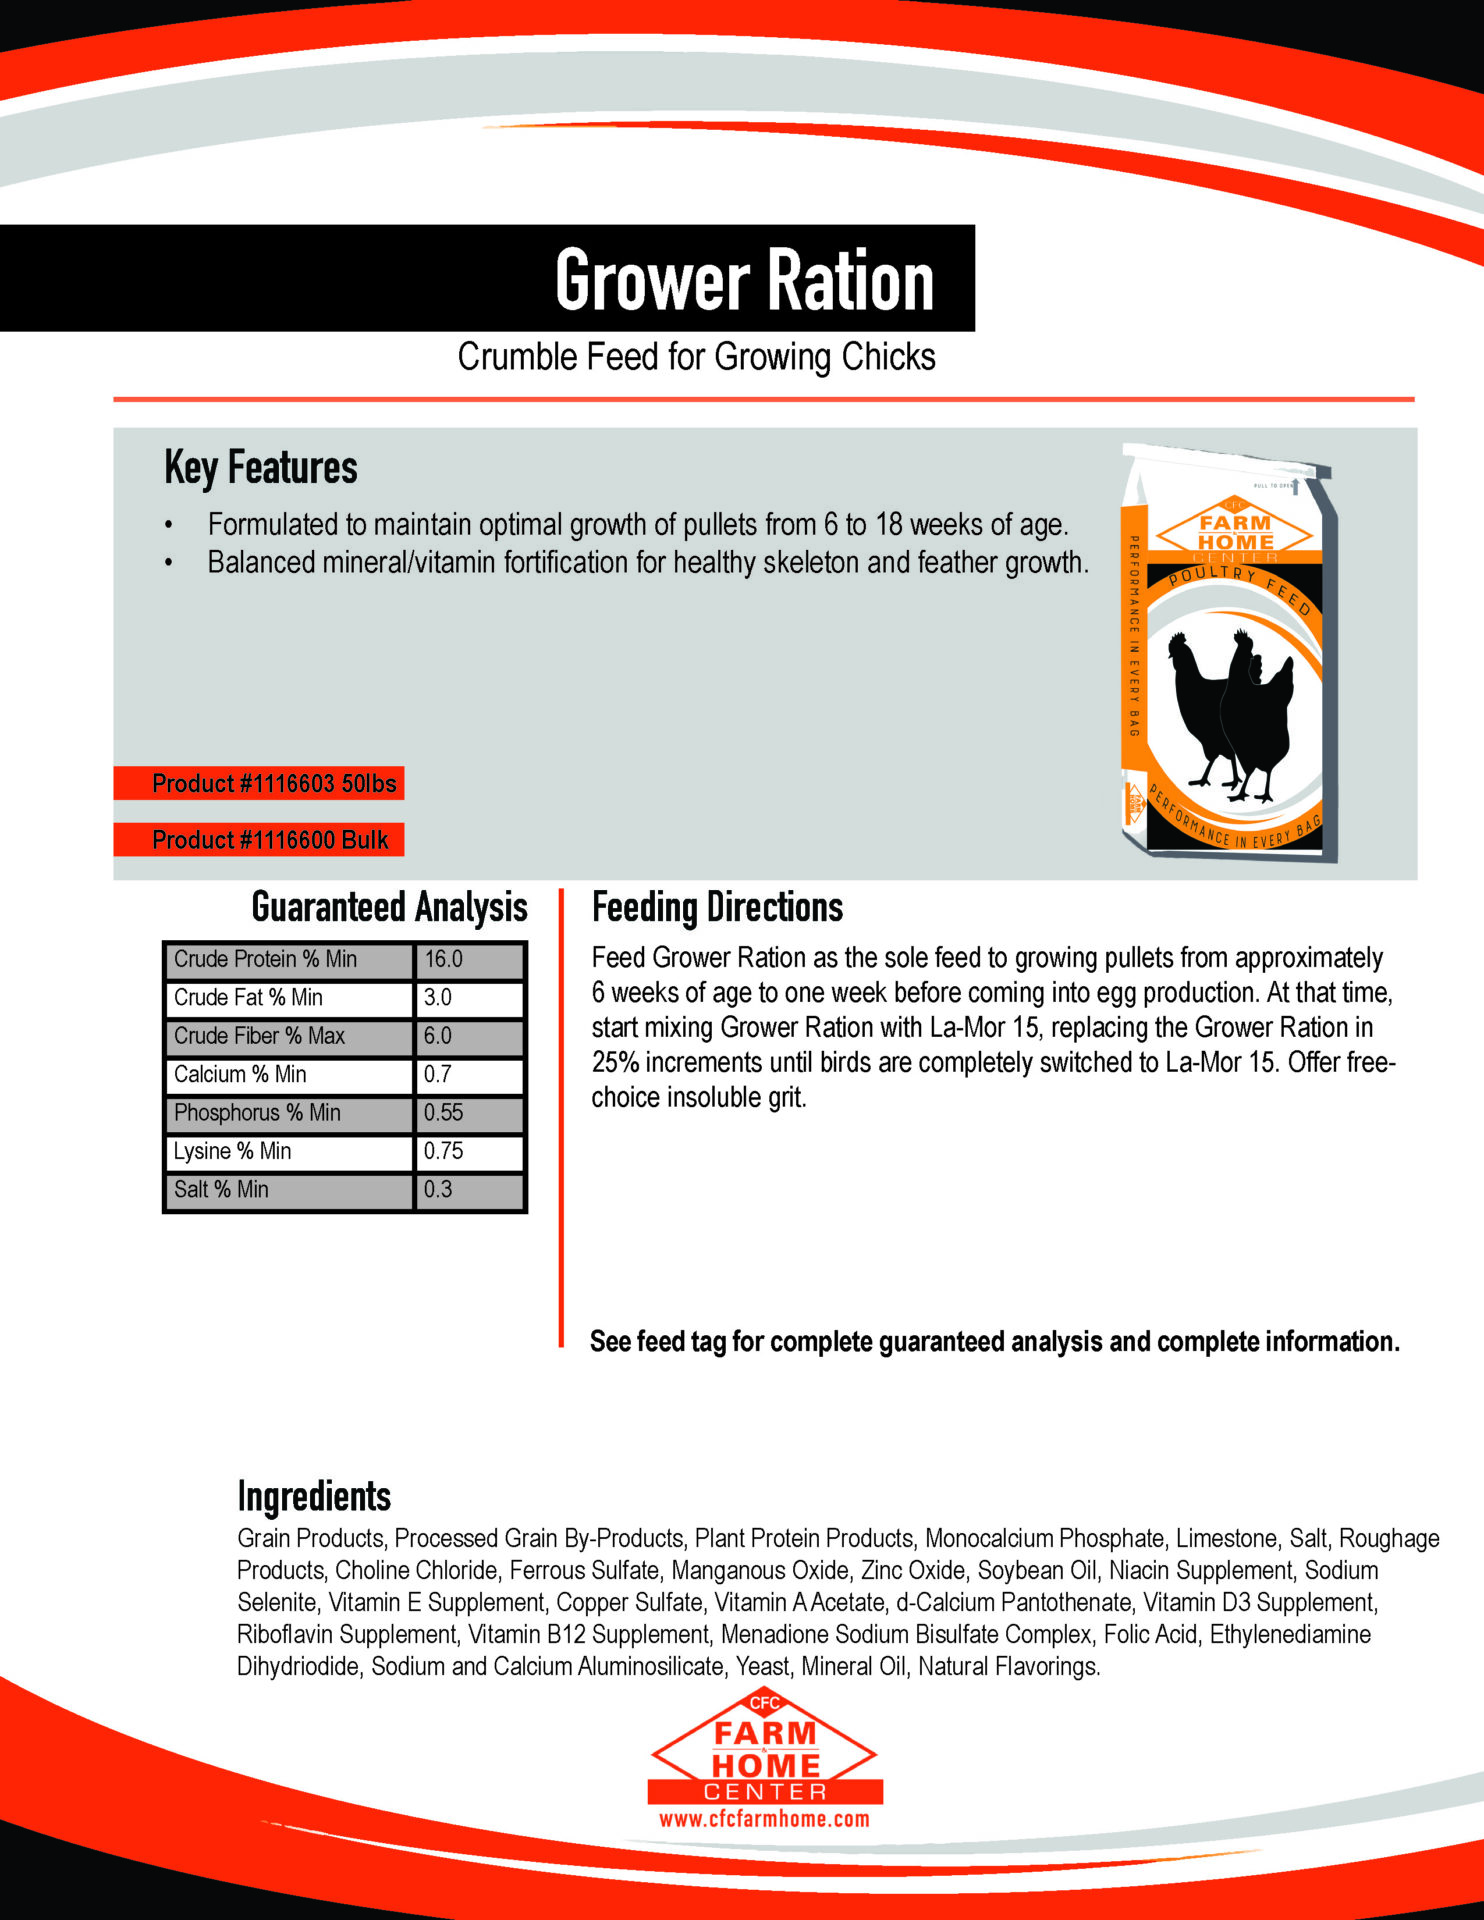 Grower Ration feed spec sheet